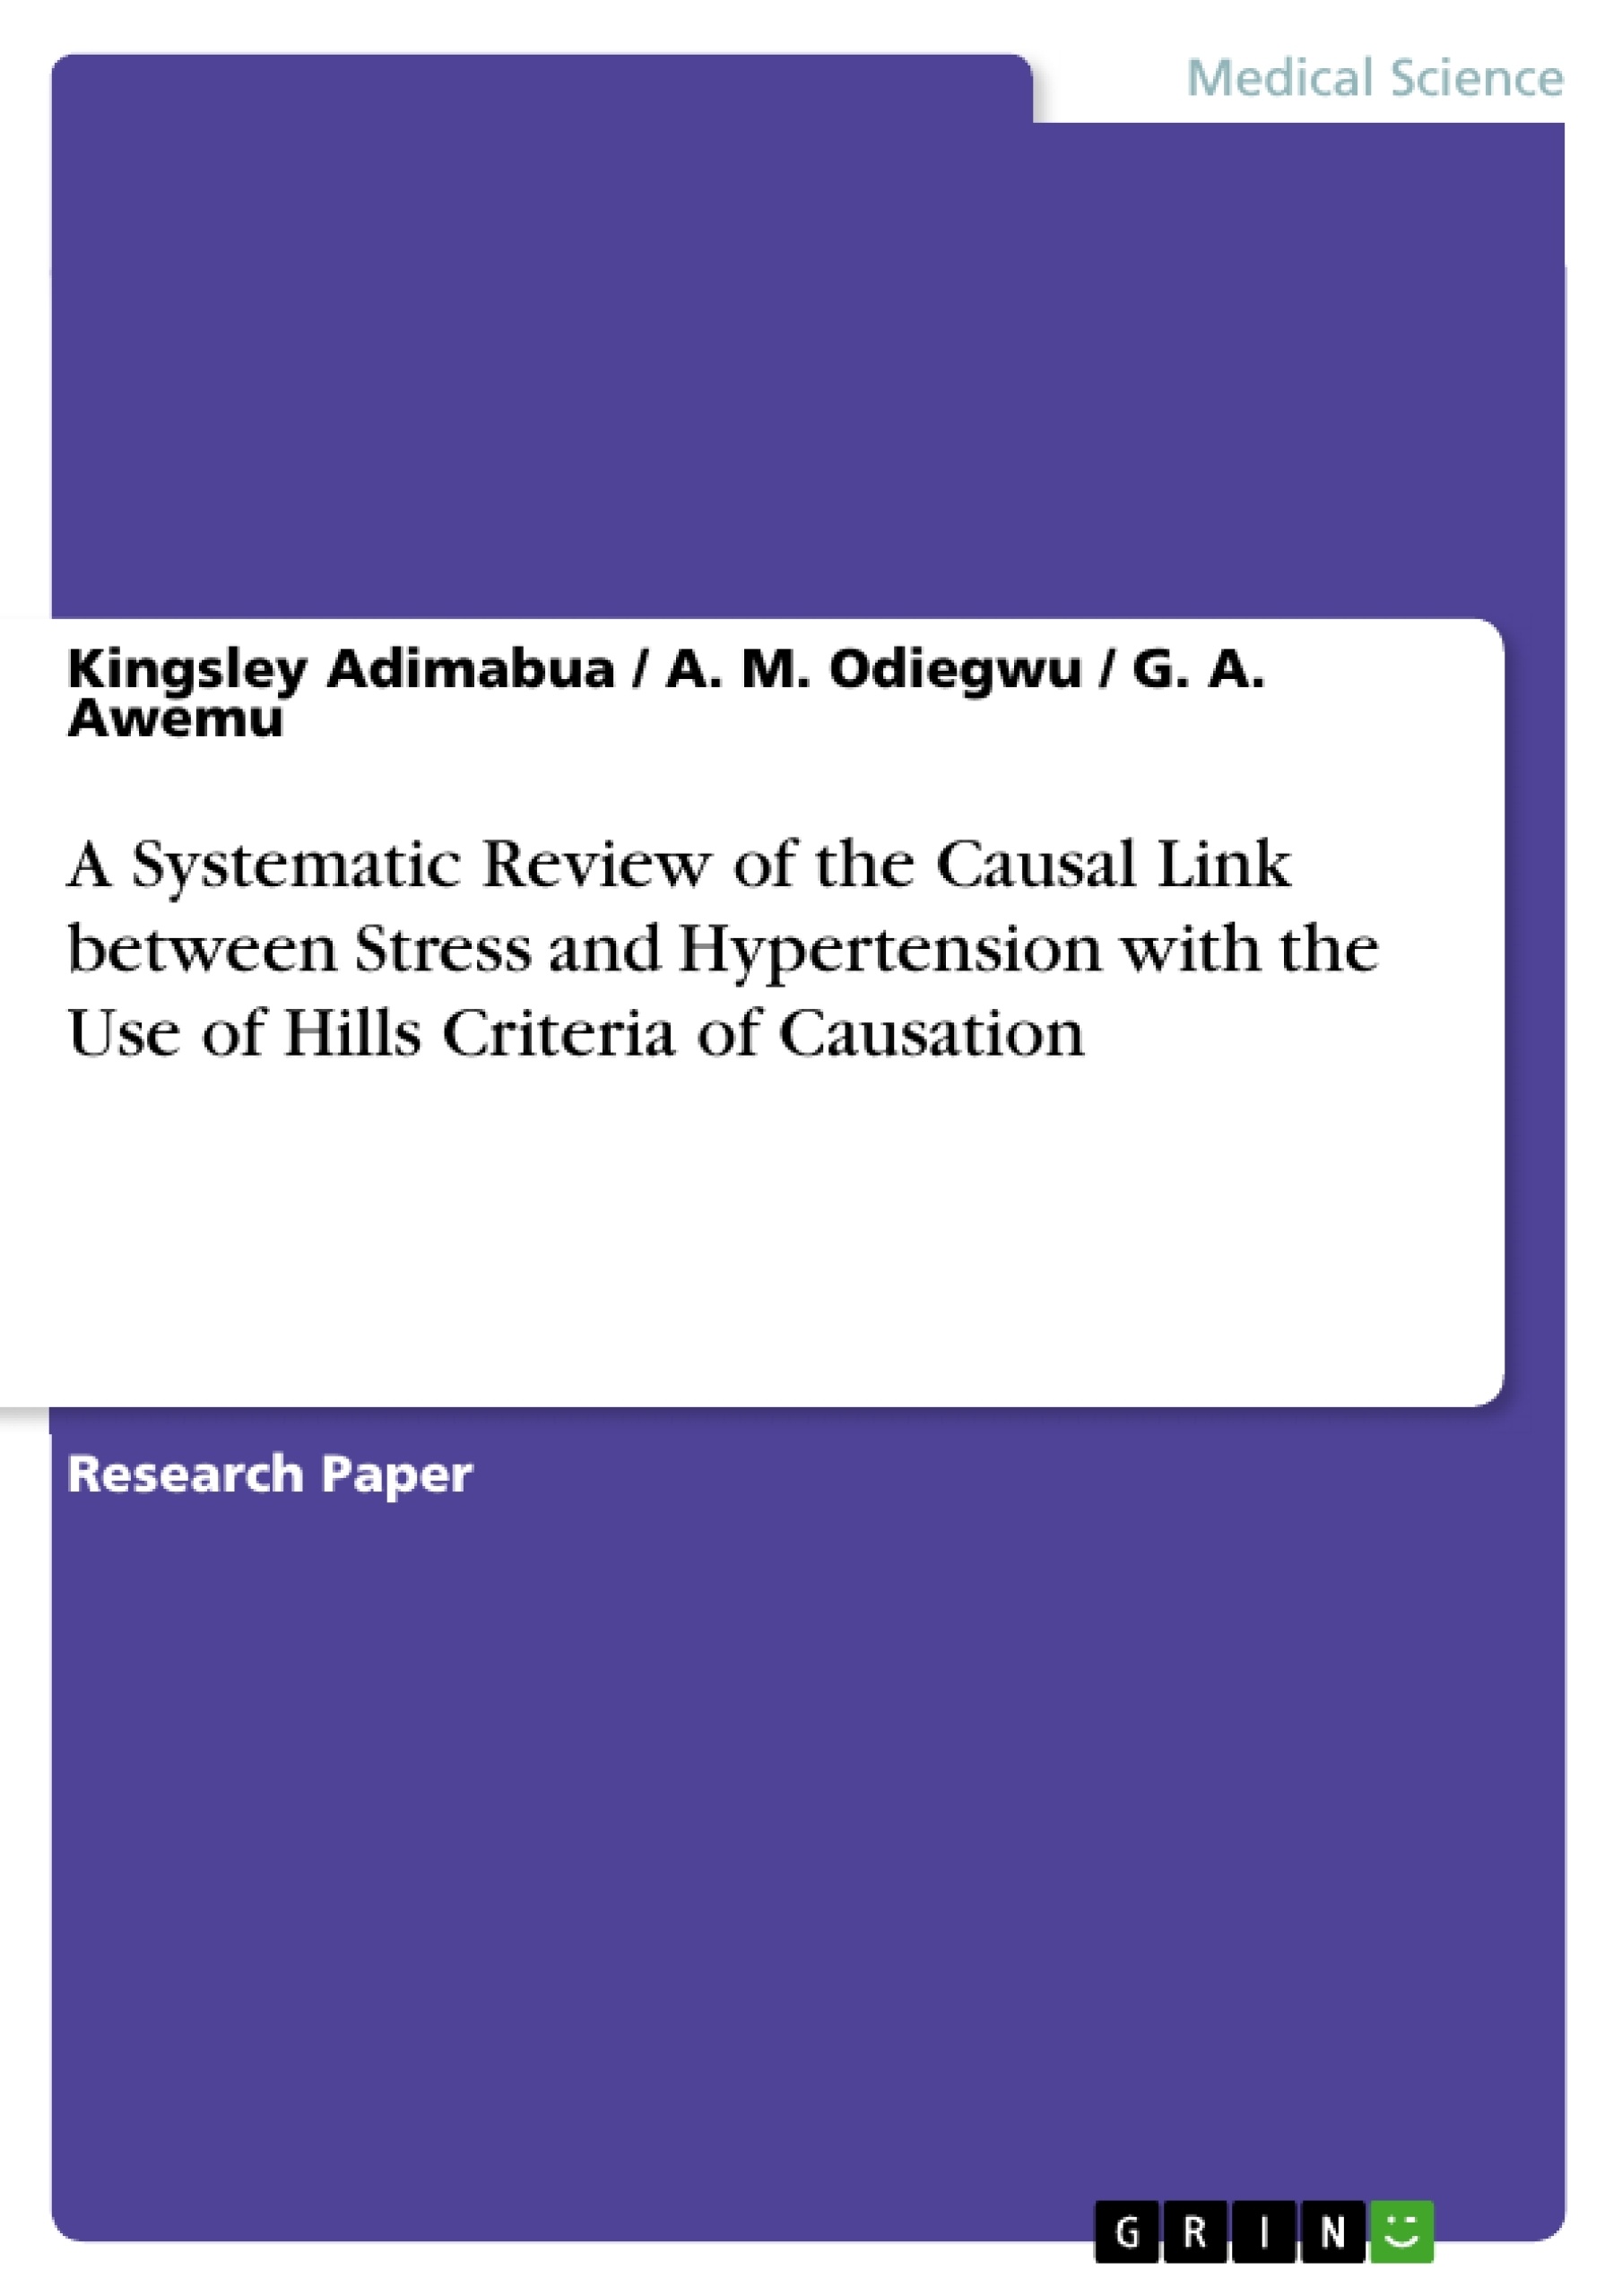 Título: A Systematic Review of the Causal Link between Stress and Hypertension with the Use of Hills Criteria of Causation